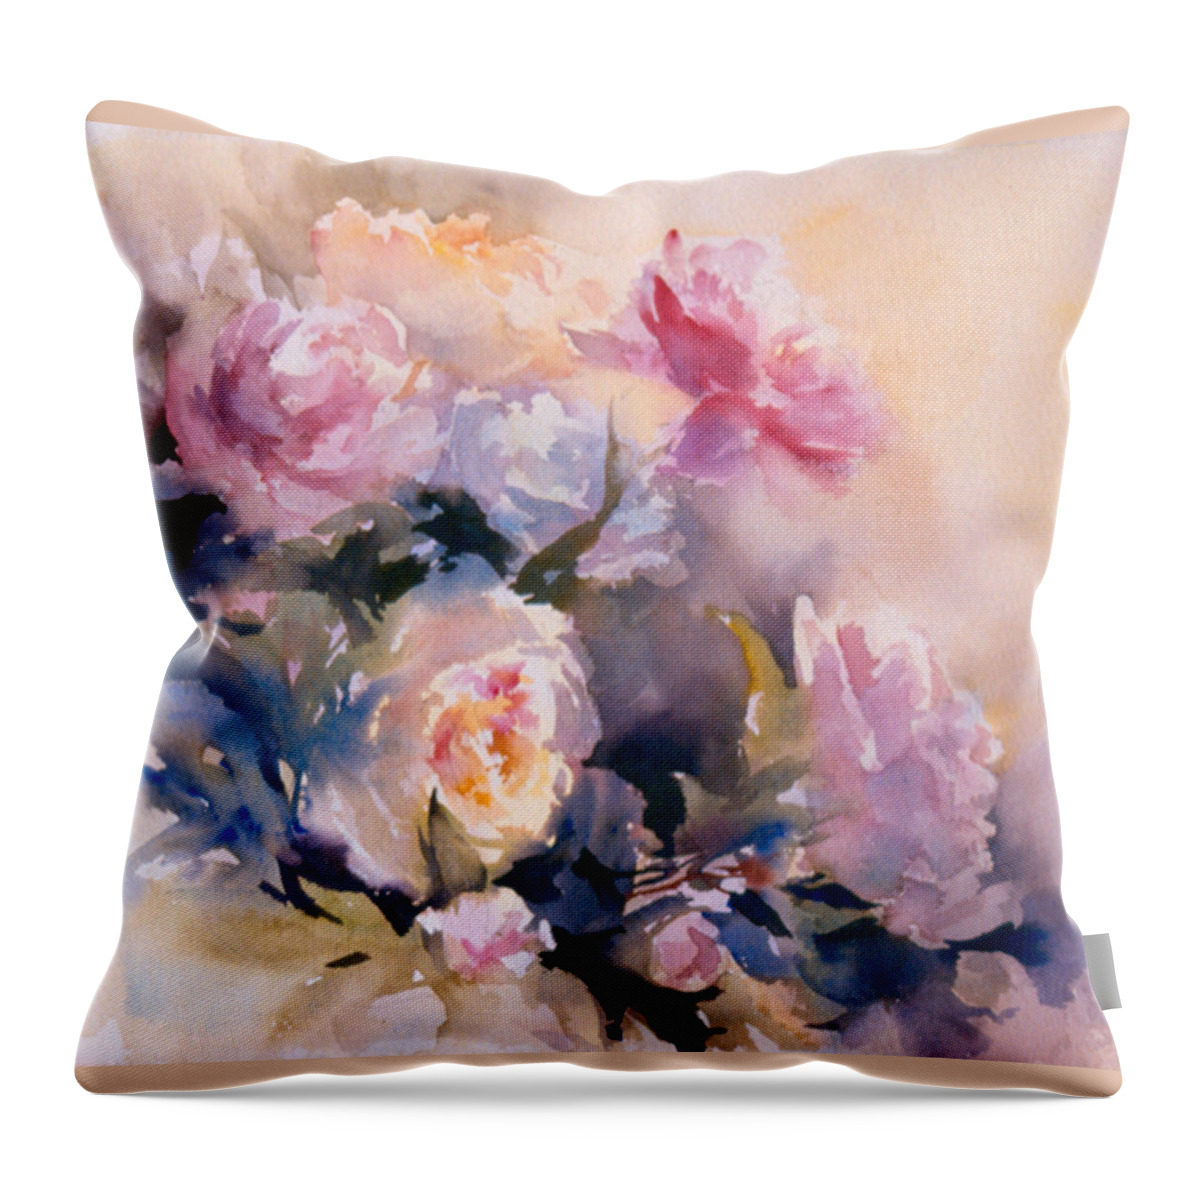 Peonies Throw Pillow featuring the painting Peonies by Susan Blackwood